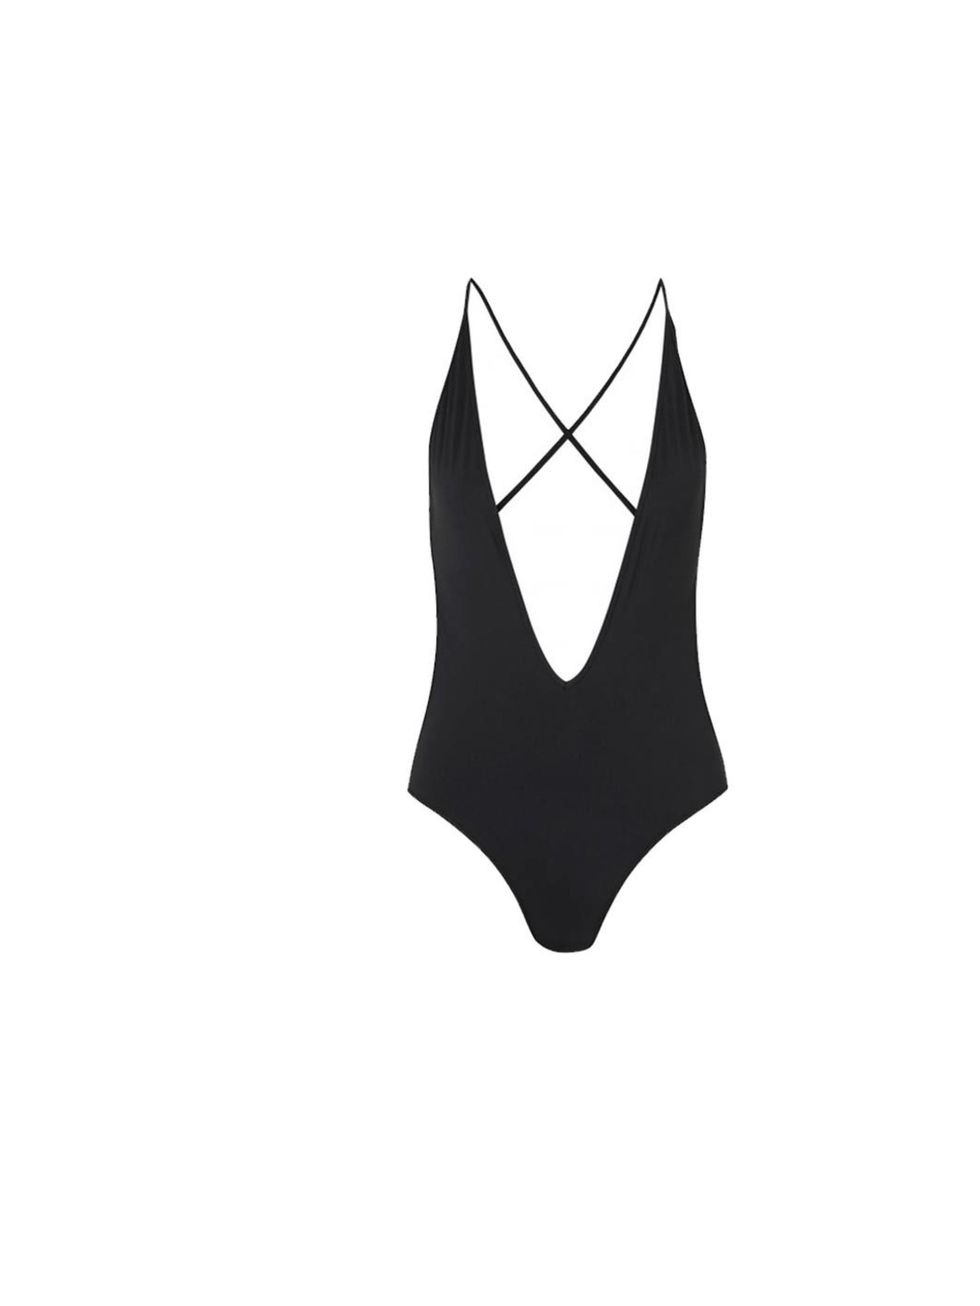 <p>Hello boys! Sex up your poolside look (but watch out for the weird tan lines) with Thapelo's 'Uma' plunge-front swimsuit, £120, at <a href="http://www.harveynichols.com/womens/categories-1/beachwear-swimwear/one-pieces/s448599-uma-plunge-front-swimsuit